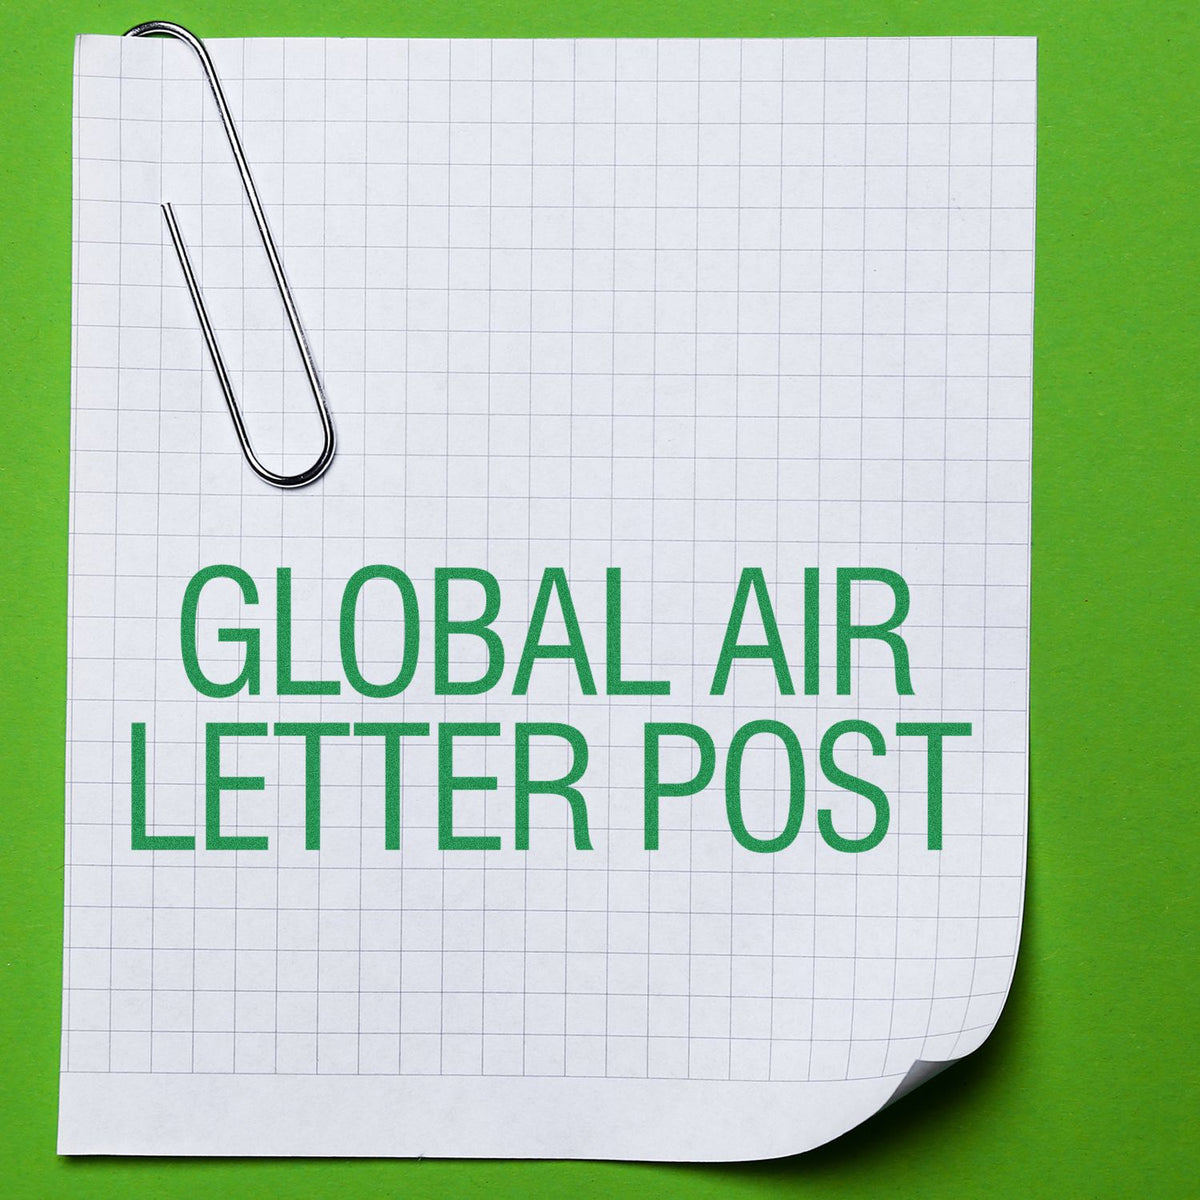 Global Air Letter Post Rubber Stamp In Use